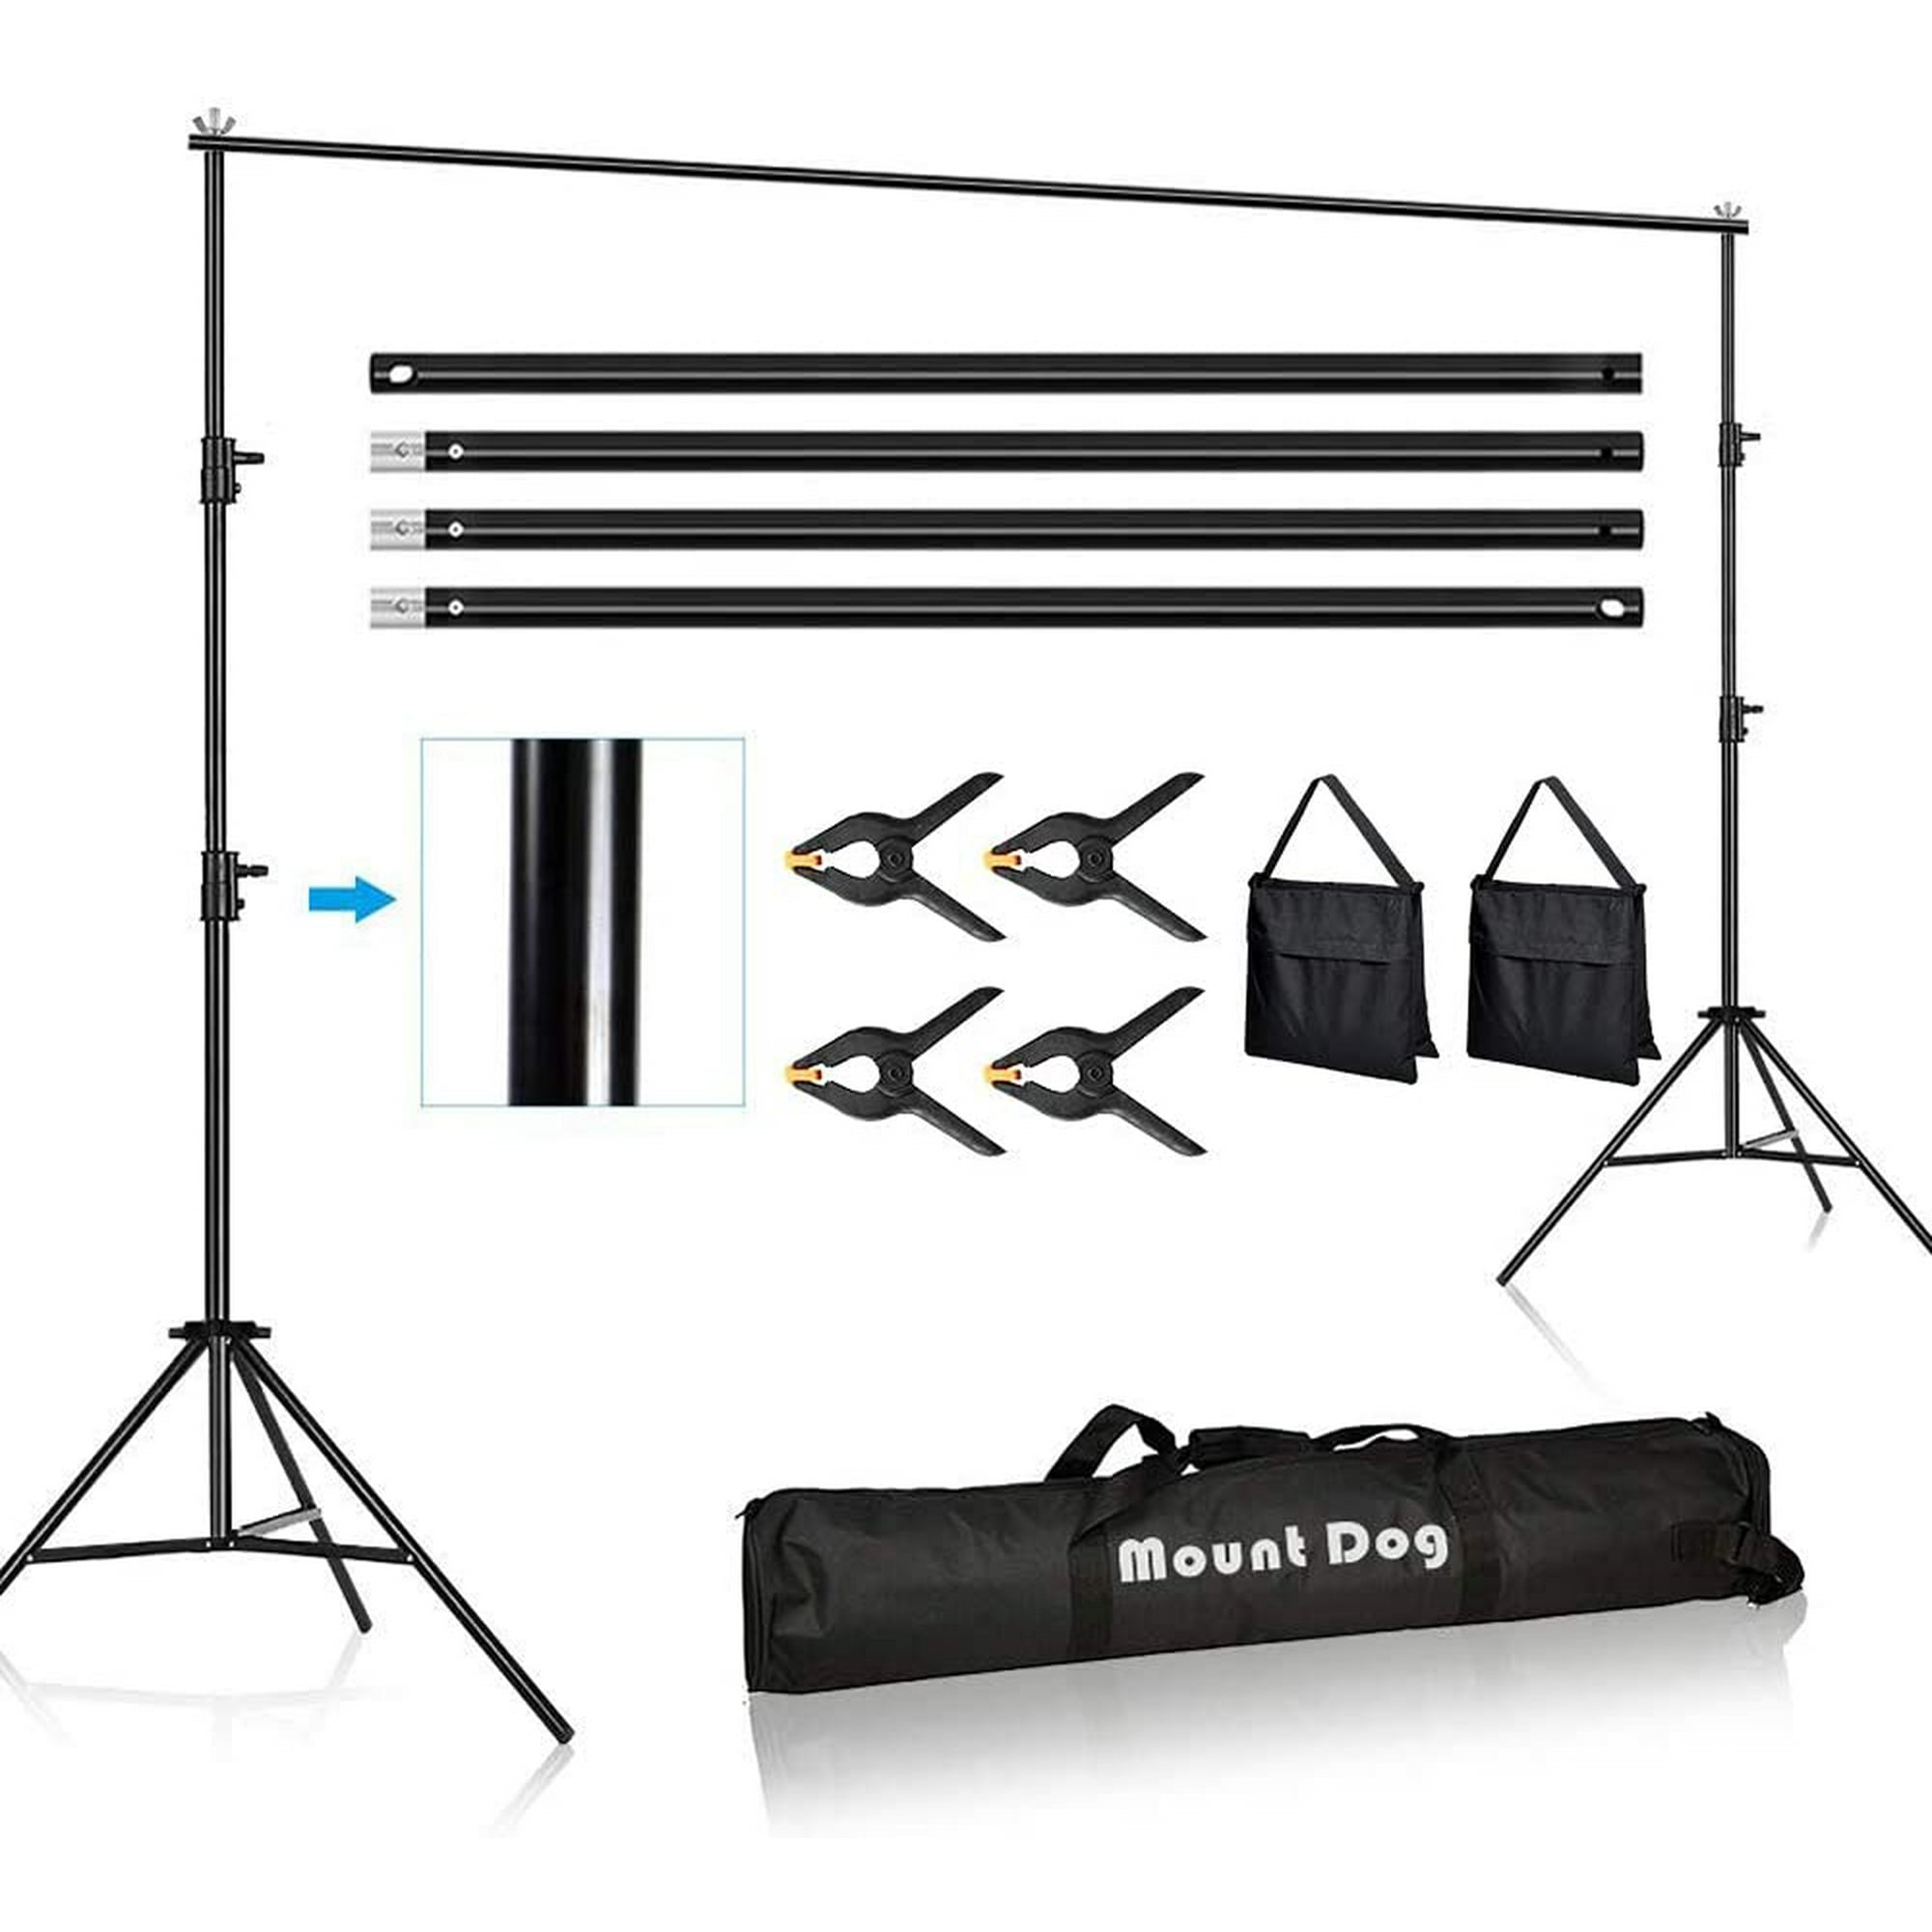 MOUNTDOG 3M x 3M/10ft x 10ft Photo Backdrop Stand Kit Photography Studio Background  Support System with 4 Clamps | Walmart Canada